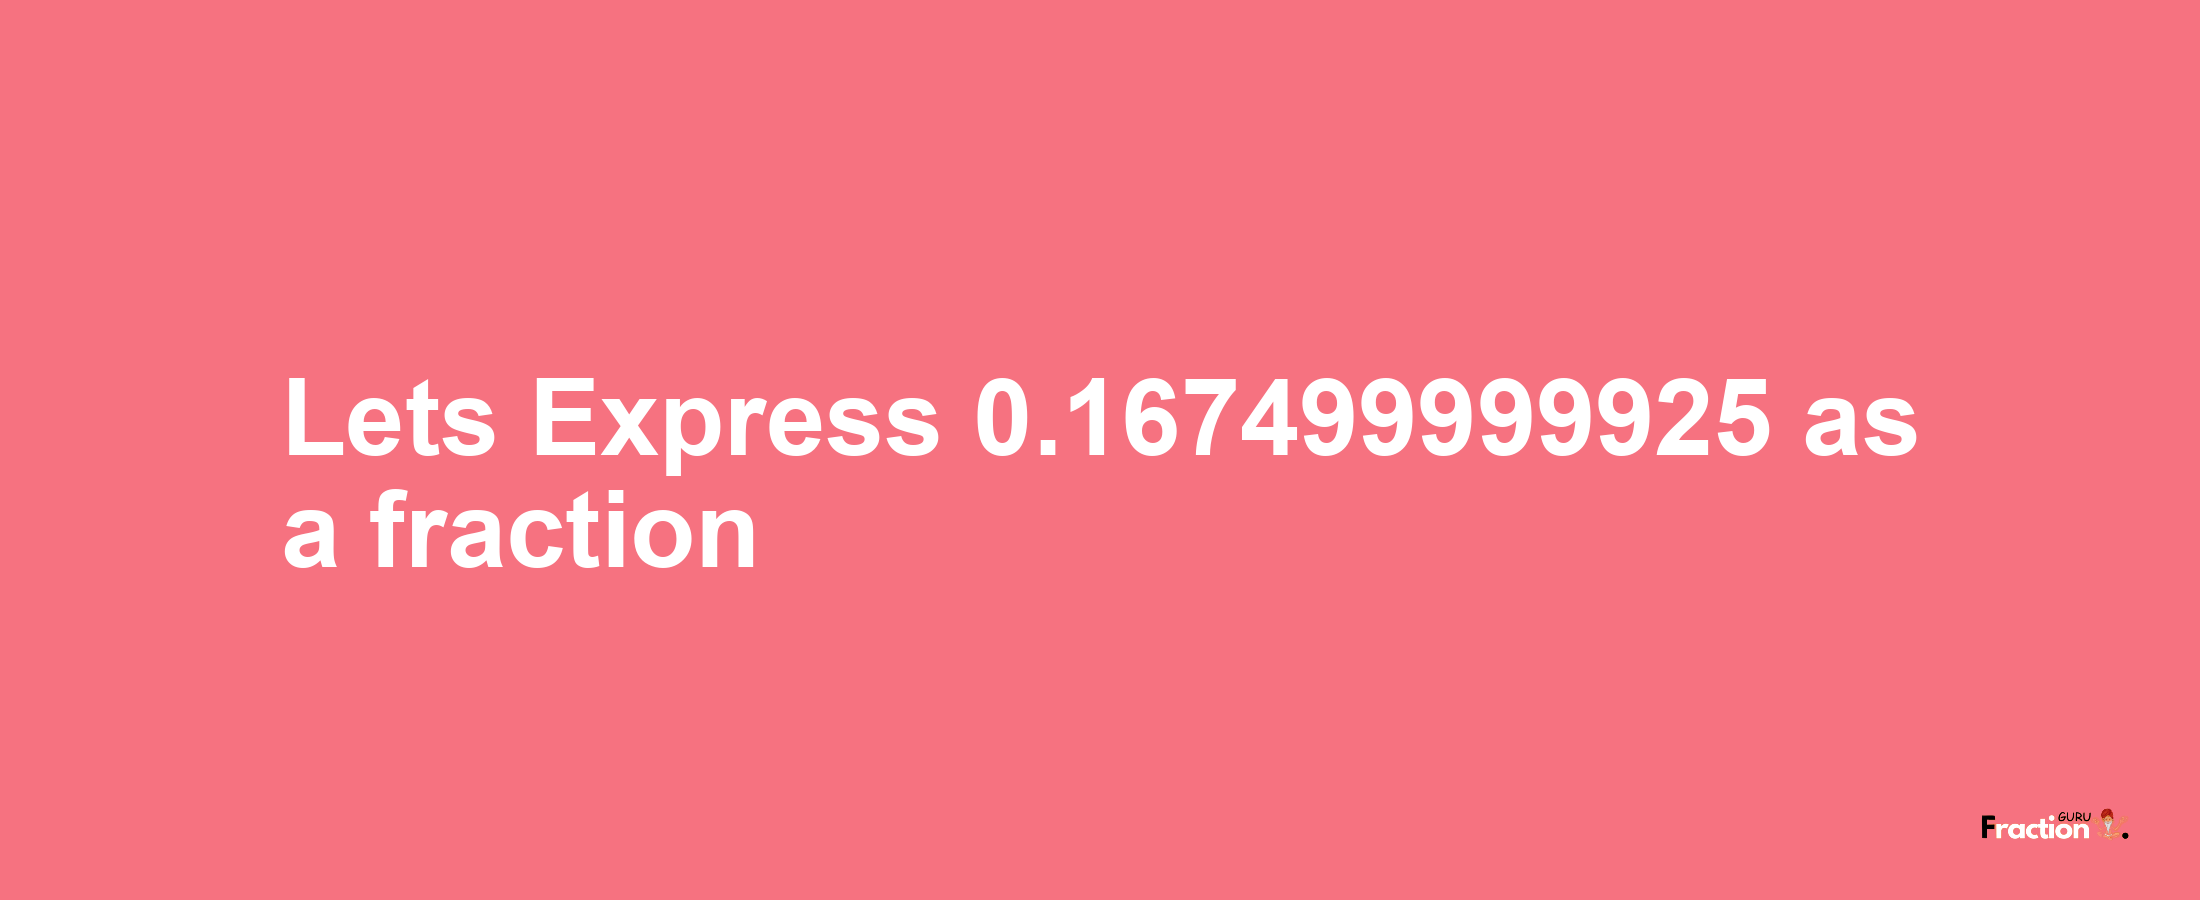 Lets Express 0.167499999925 as afraction